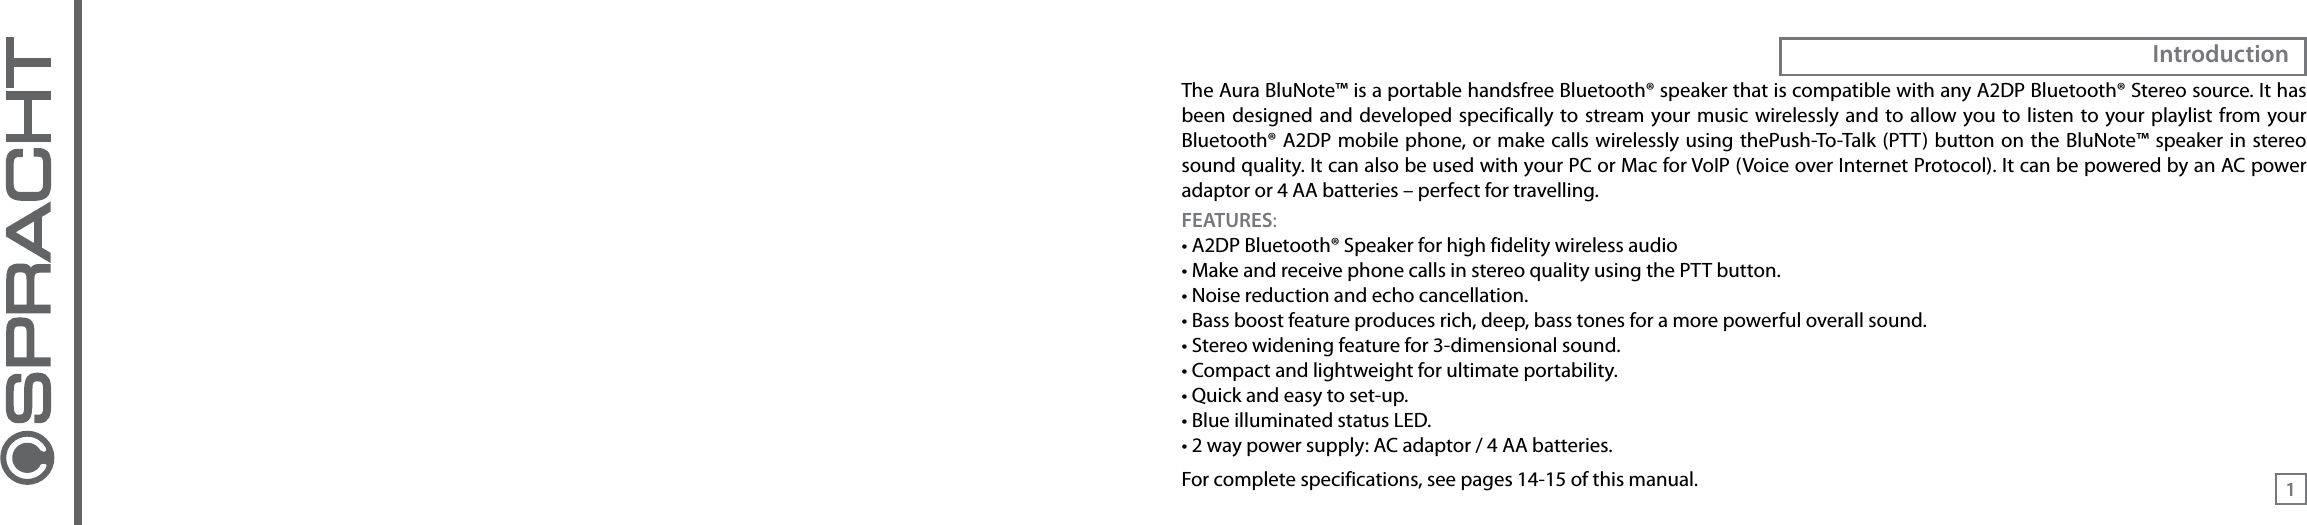 The Aura BluNote™ is a portable handsfree Bluetooth® speaker that is compatible with any A2DP Bluetooth® Stereo source. It has been designed and  developed specifically to stream your  music  wirelessly and to allow you to listen to your playlist from your Bluetooth® A2DP mobile phone, or  make calls wirelessly using  thePush-To-Talk (PTT) button on the  BluNote™ speaker in stereo sound quality. It can also be used with your PC or Mac for VoIP (Voice over Internet Protocol). It can be powered by an AC power adaptor or 4 AA batteries – perfect for travelling. FEATURES:• A2DP Bluetooth® Speaker for high fidelity wireless audio• Make and receive phone calls in stereo quality using the PTT button.• Noise reduction and echo cancellation.• Bass boost feature produces rich, deep, bass tones for a more powerful overall sound.• Stereo widening feature for 3-dimensional sound.• Compact and lightweight for ultimate portability.• Quick and easy to set-up.• Blue illuminated status LED.• 2 way power supply: AC adaptor / 4 AA batteries.For complete specifications, see pages 14-15 of this manual.Introduction1